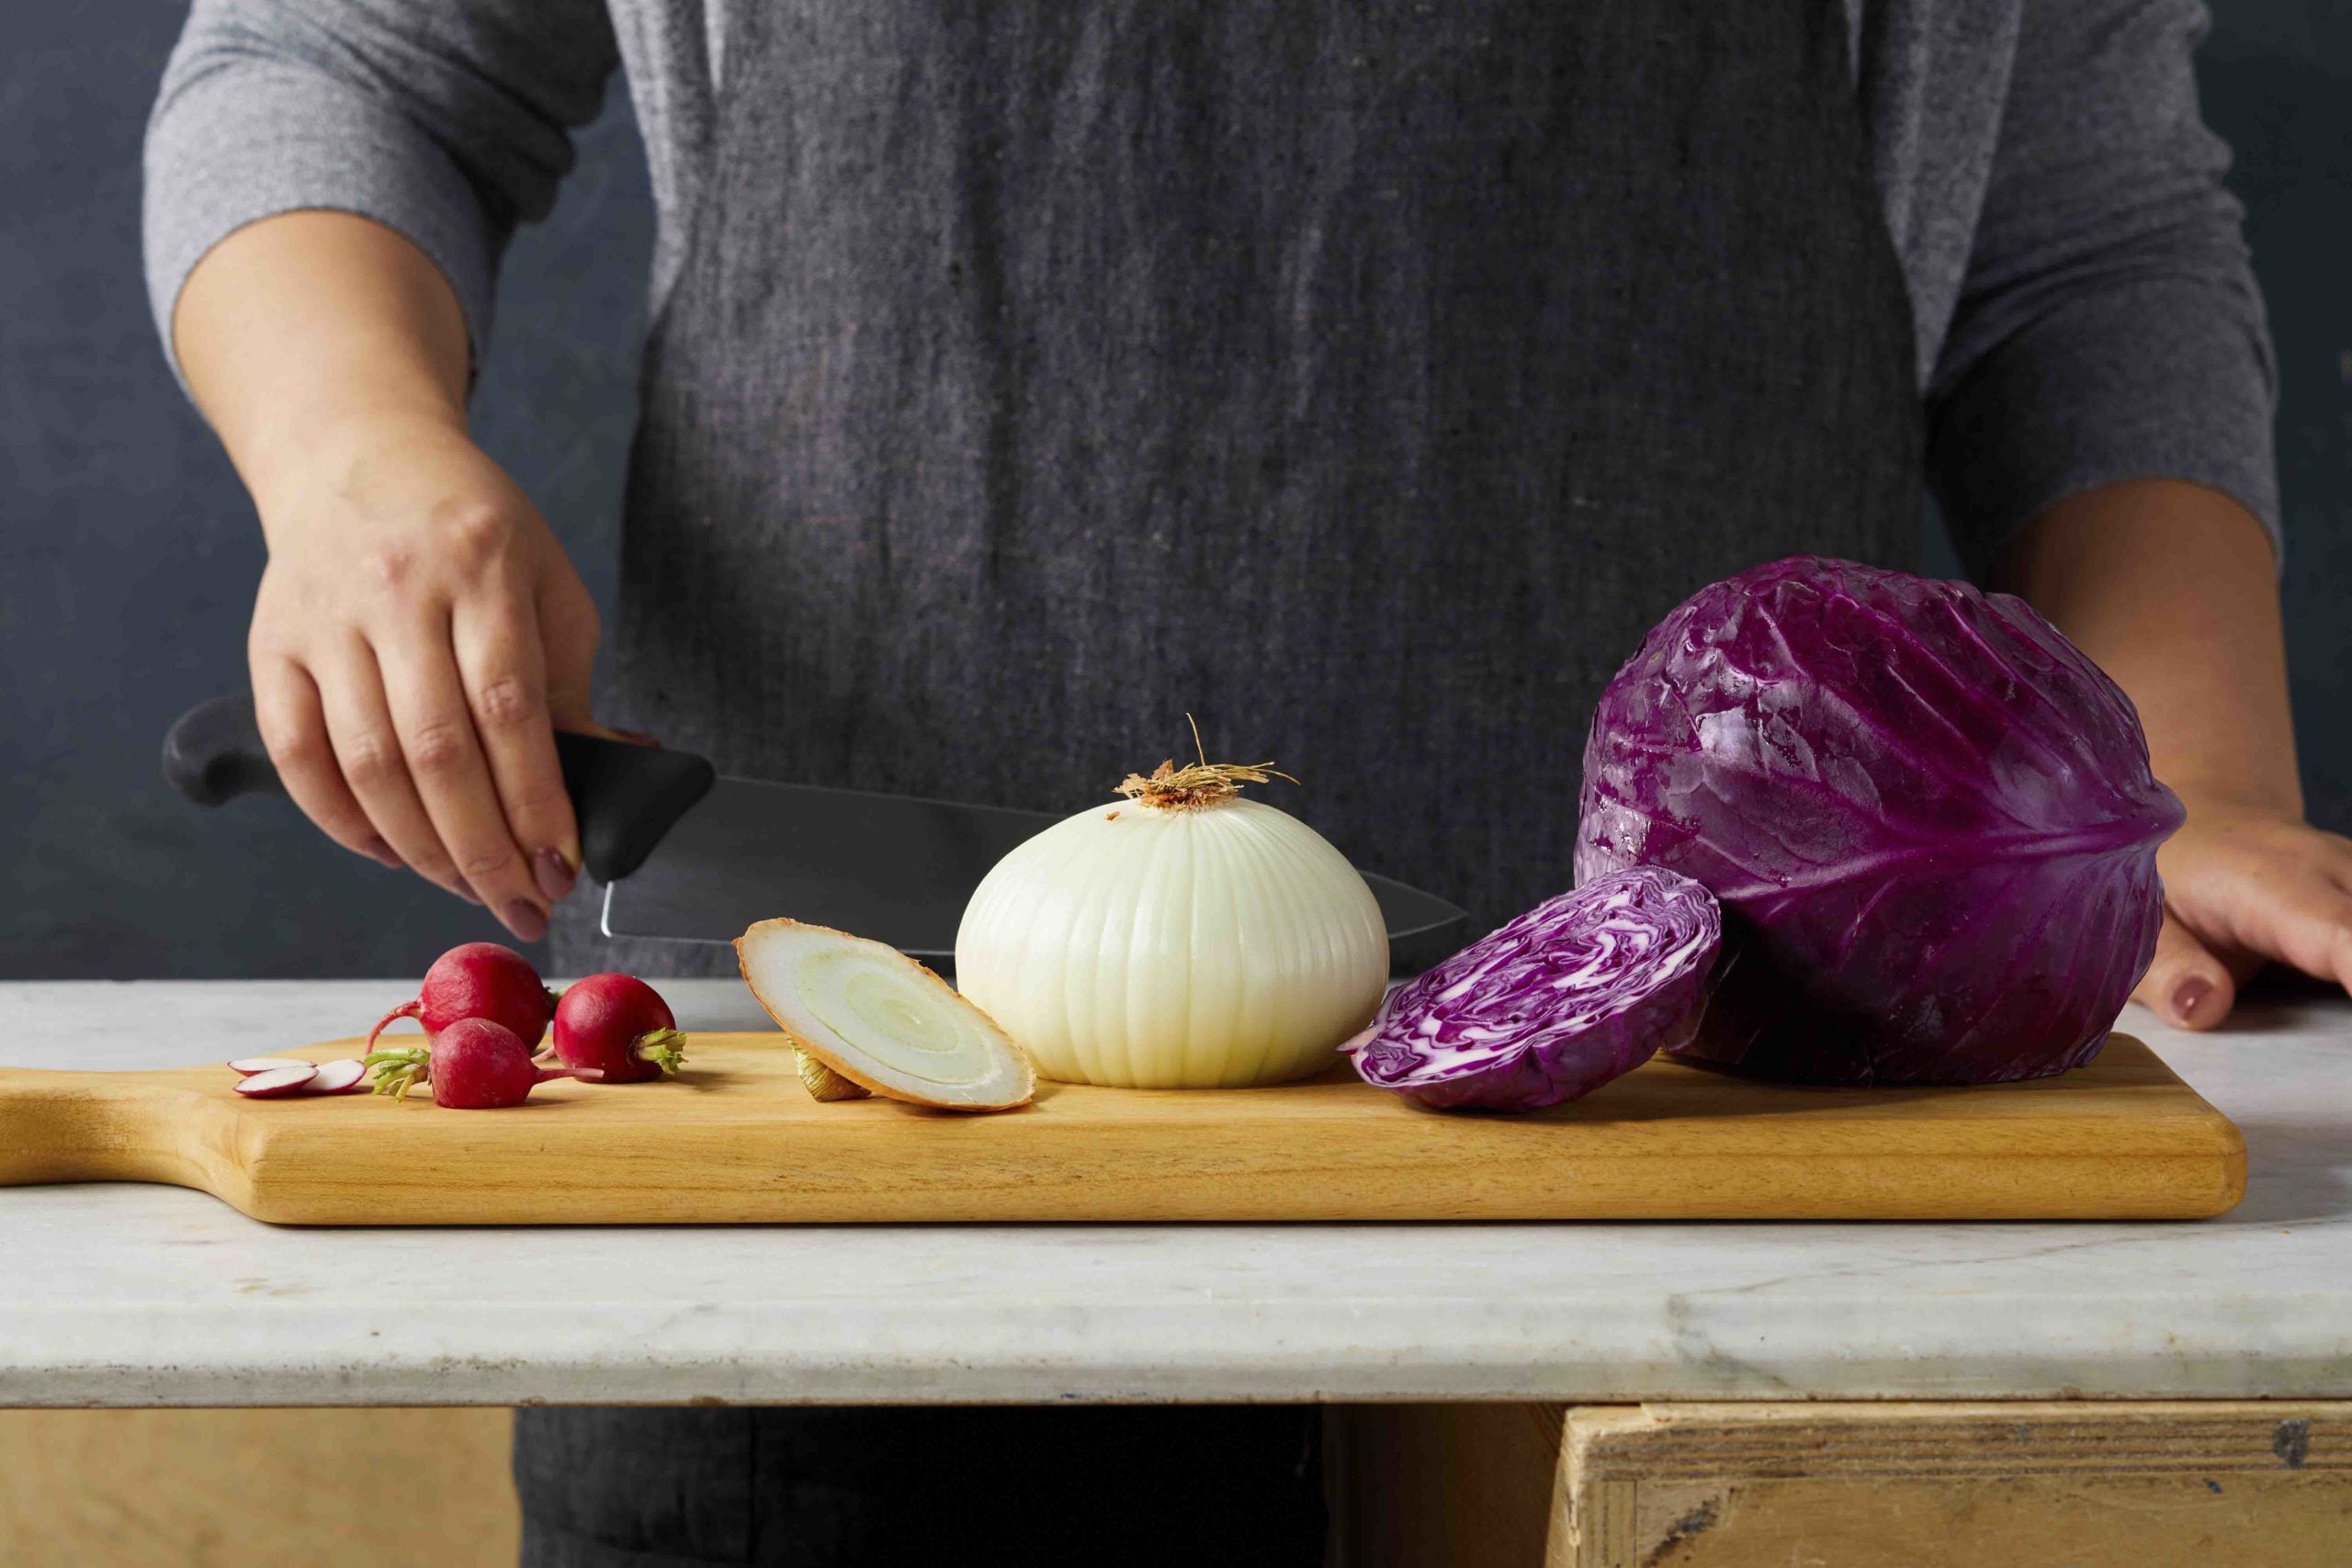 The midsection of a person standing behind a cutting board on a counter; on the cutting board are radishes, onions, cabbage, being cut into blocks to help create stability for slicing and dicing